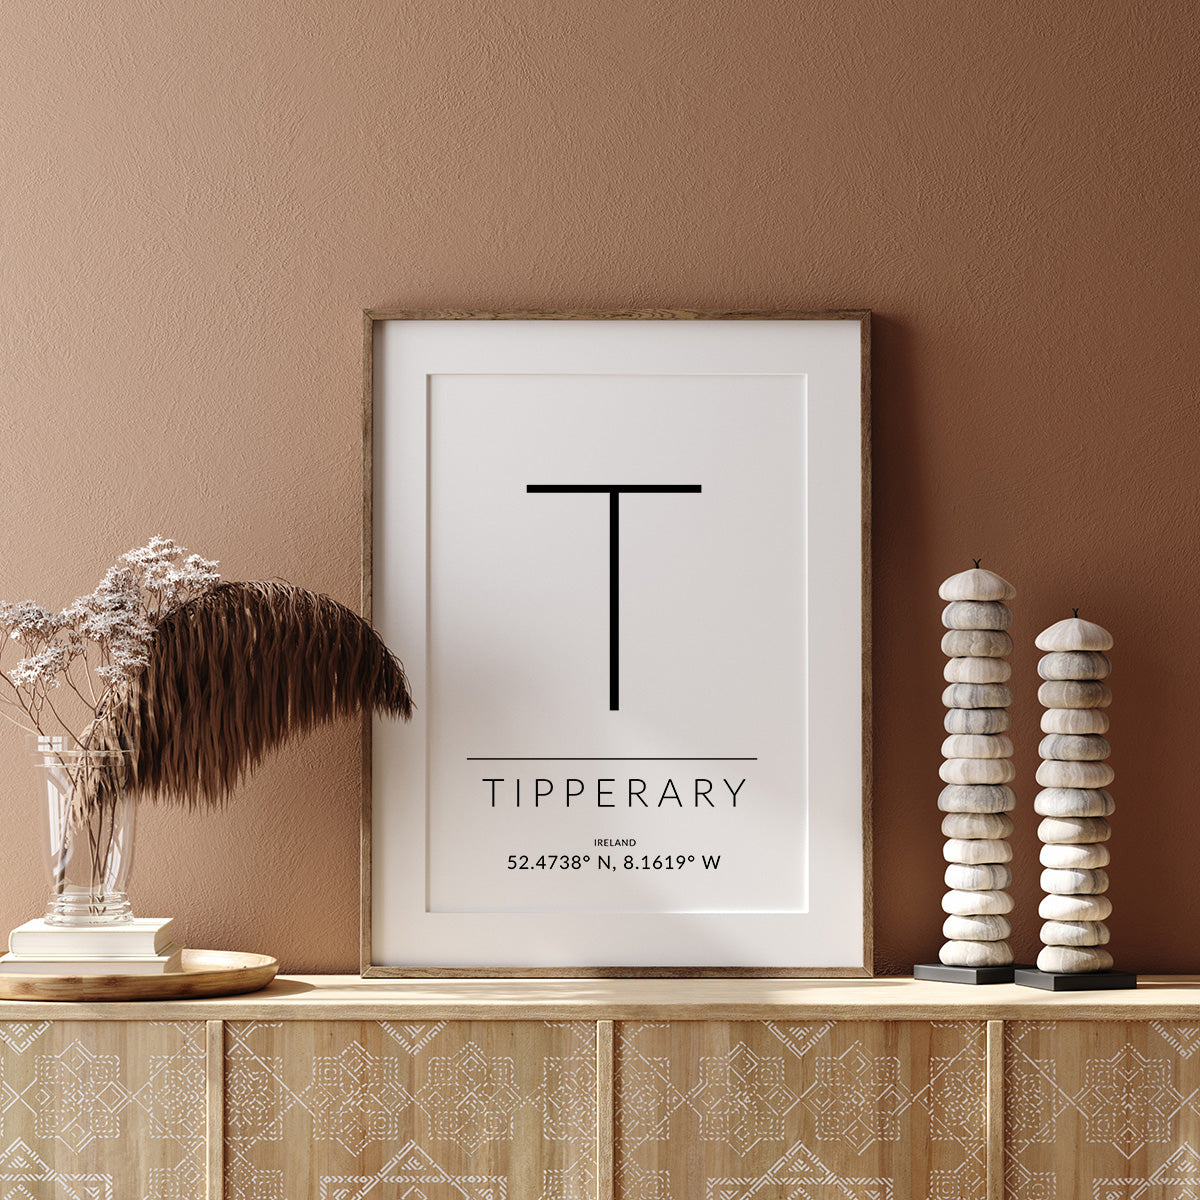 tipperary ireland print gifts